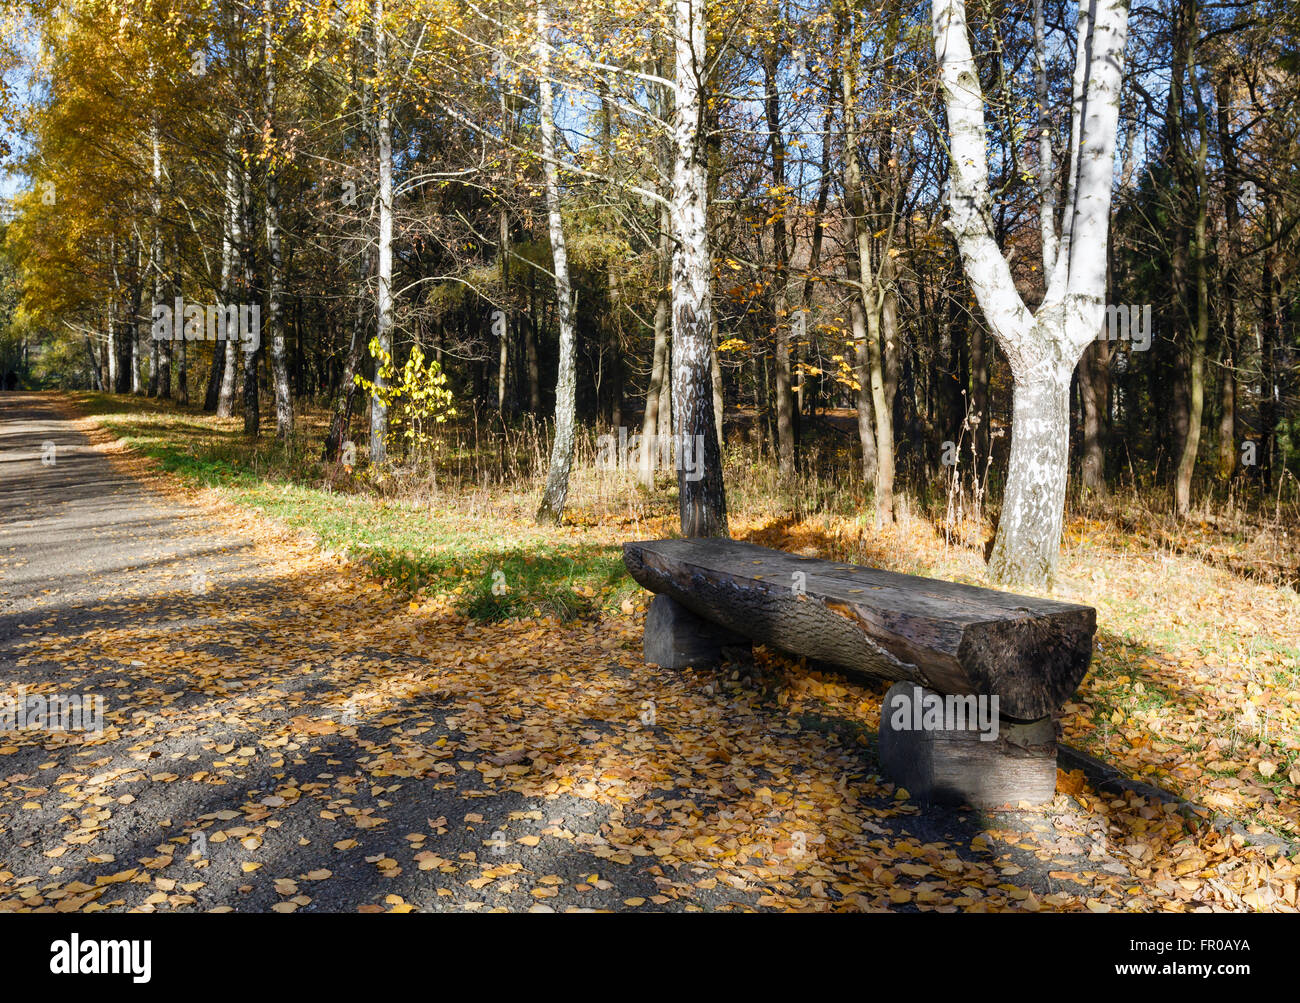 Bench from logs of wood along footway in golden autumn city park. Stock Photo